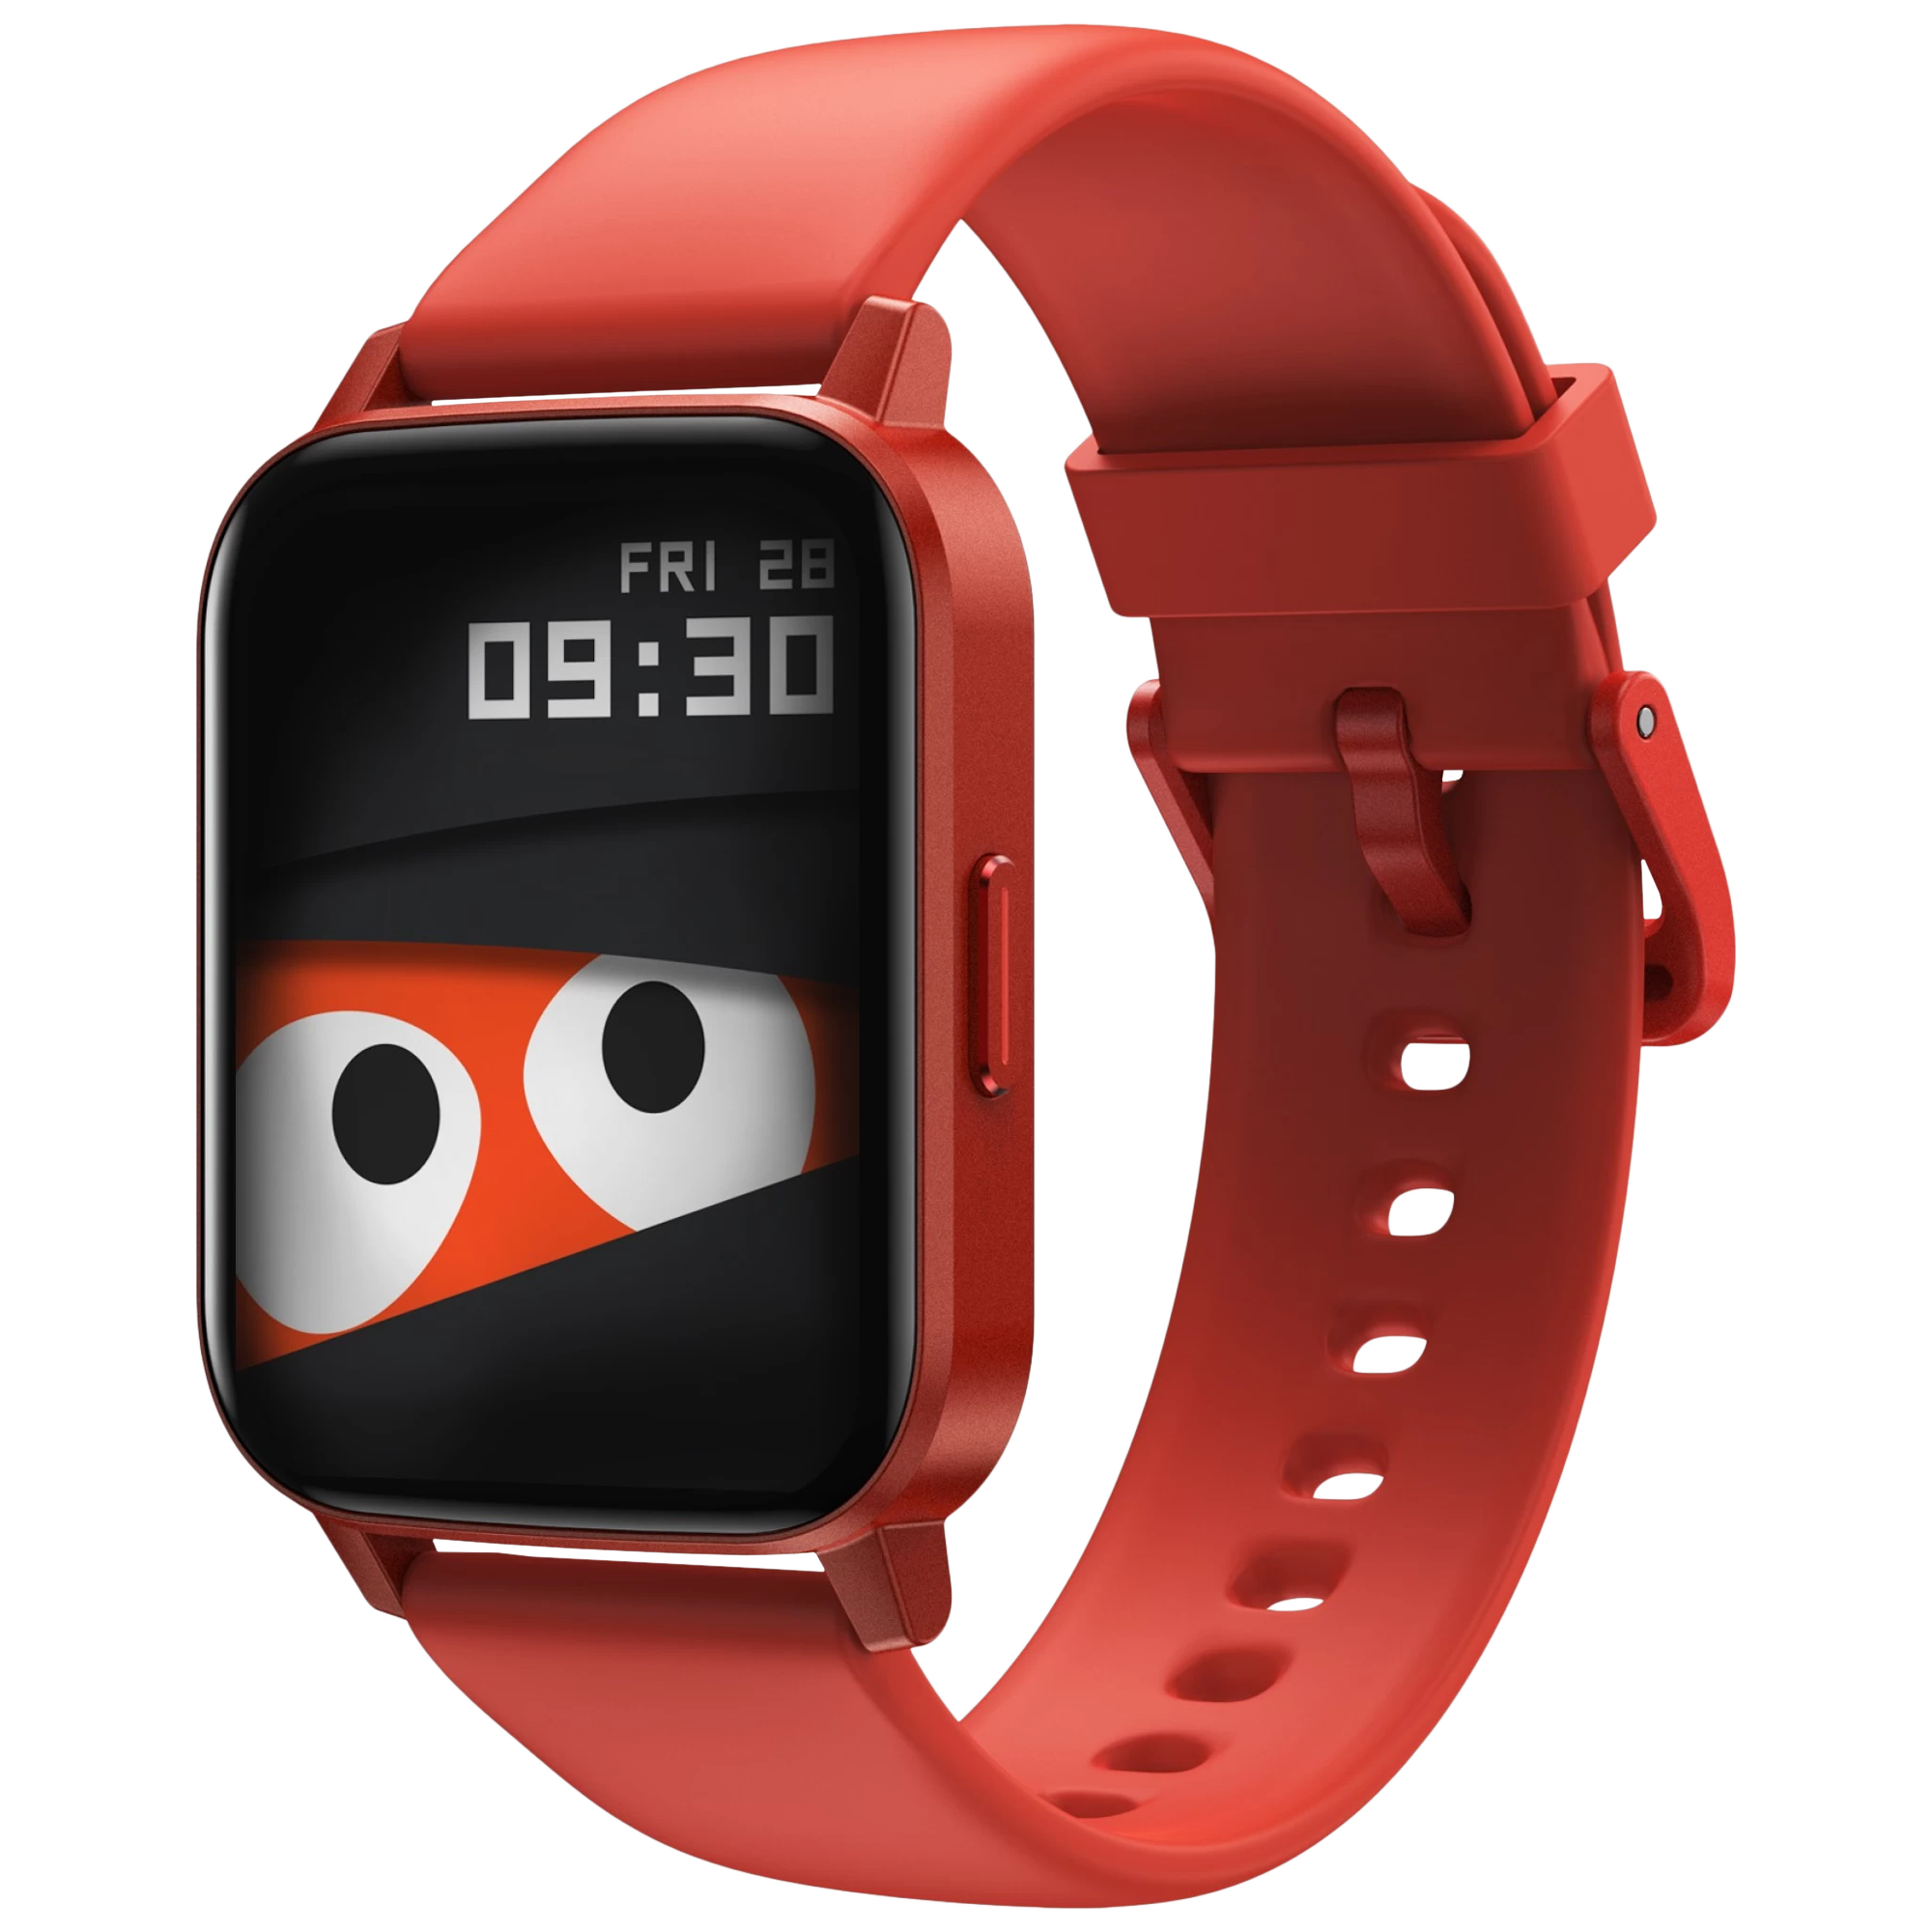 DIZO Watch 2 Sports Smartwatch with Activity Tracker (42.9mm TFT Display, 5ATM Water Resistant, Passion Red Strap)_1